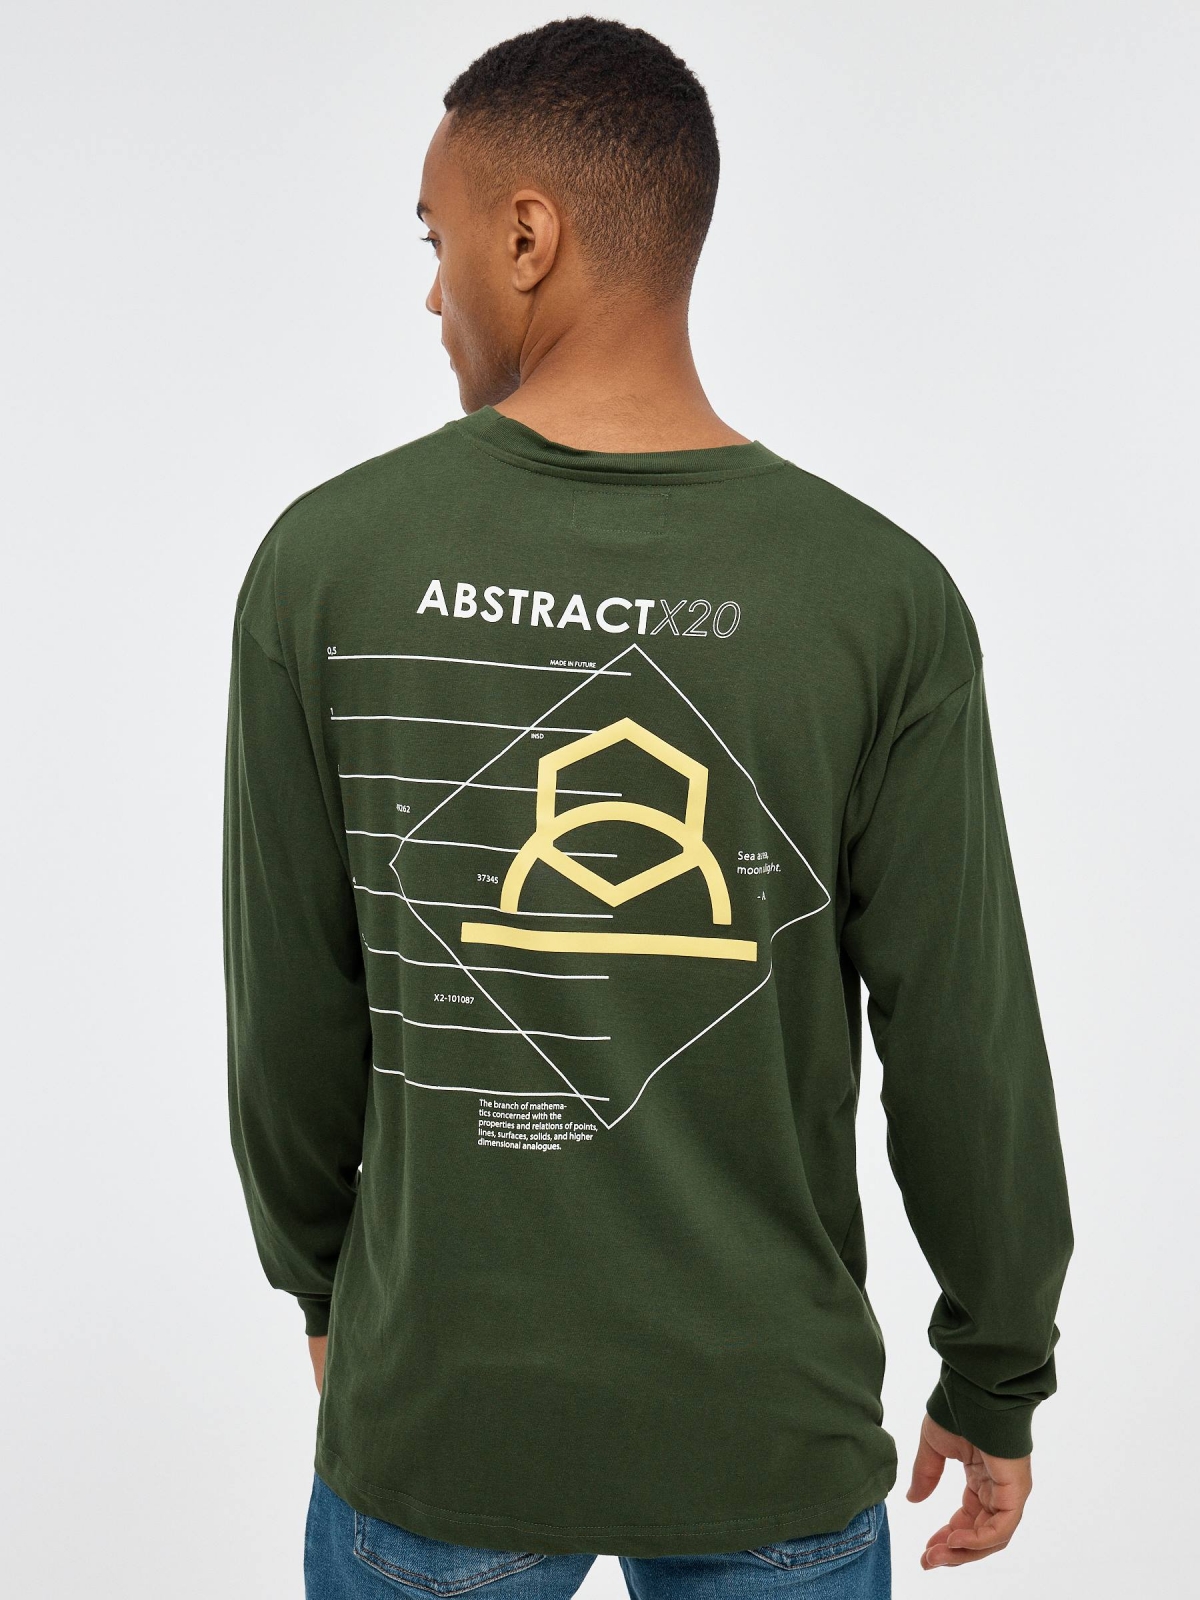 ABSTRACT print T-shirt dark green middle back view